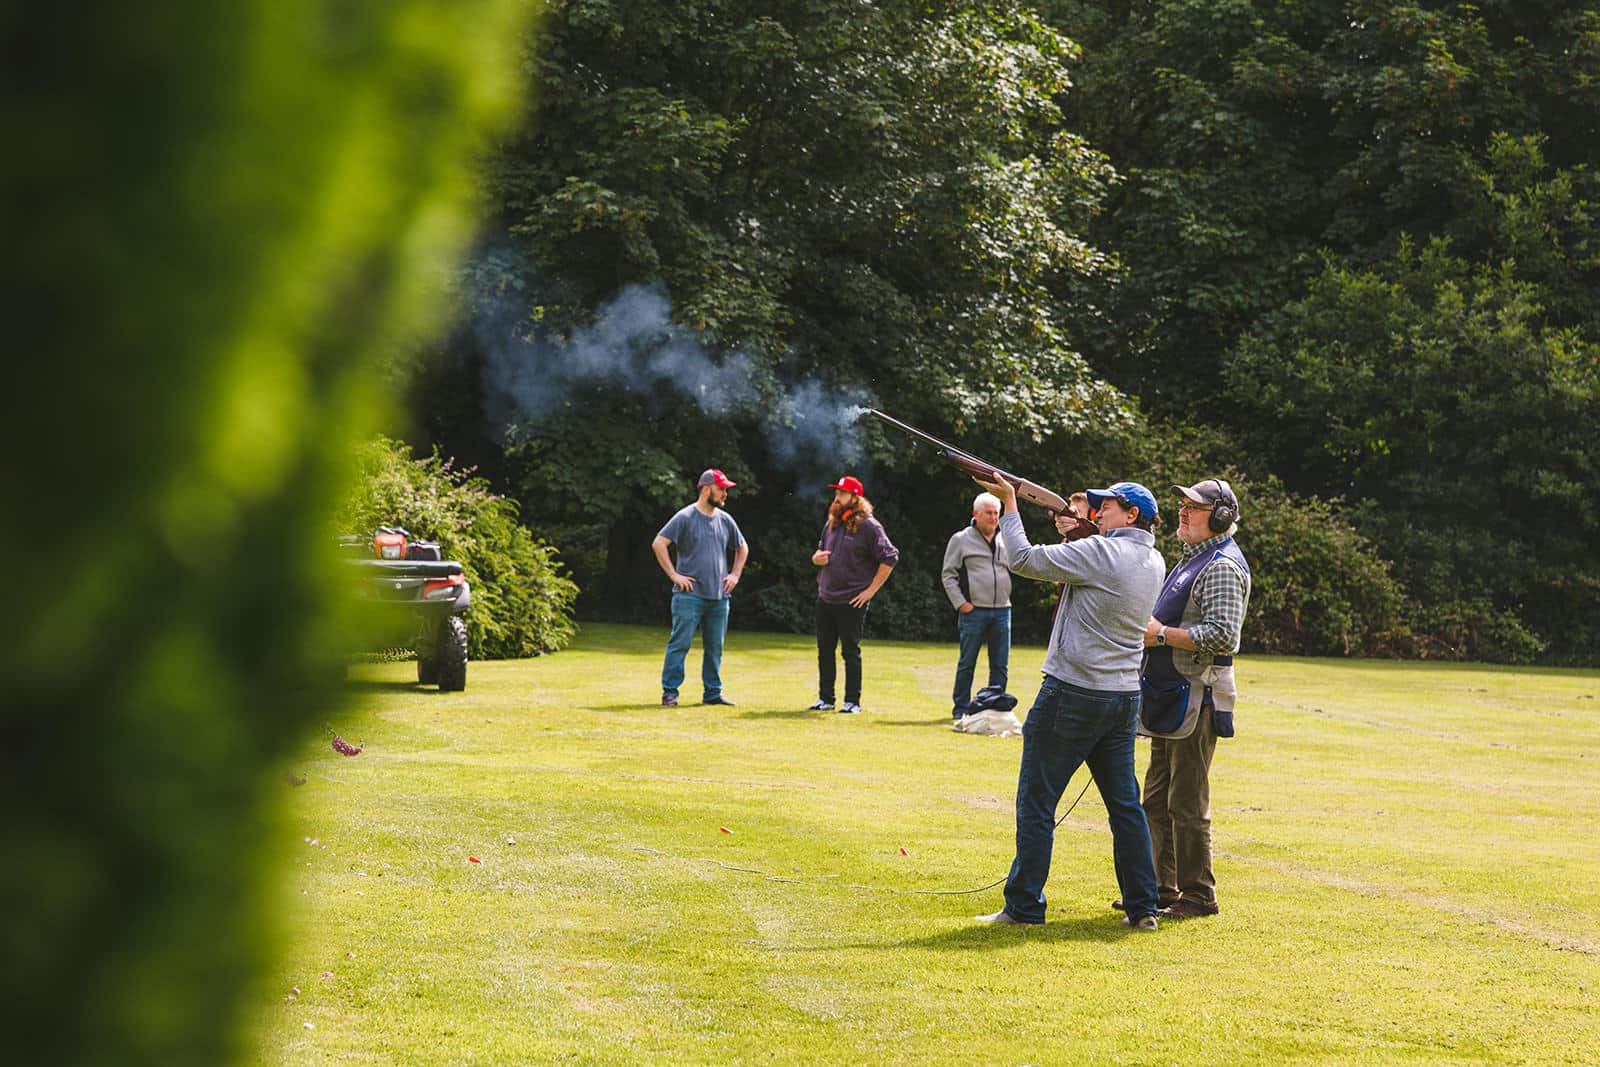 Clay pigeon shooting at Waterford Castle